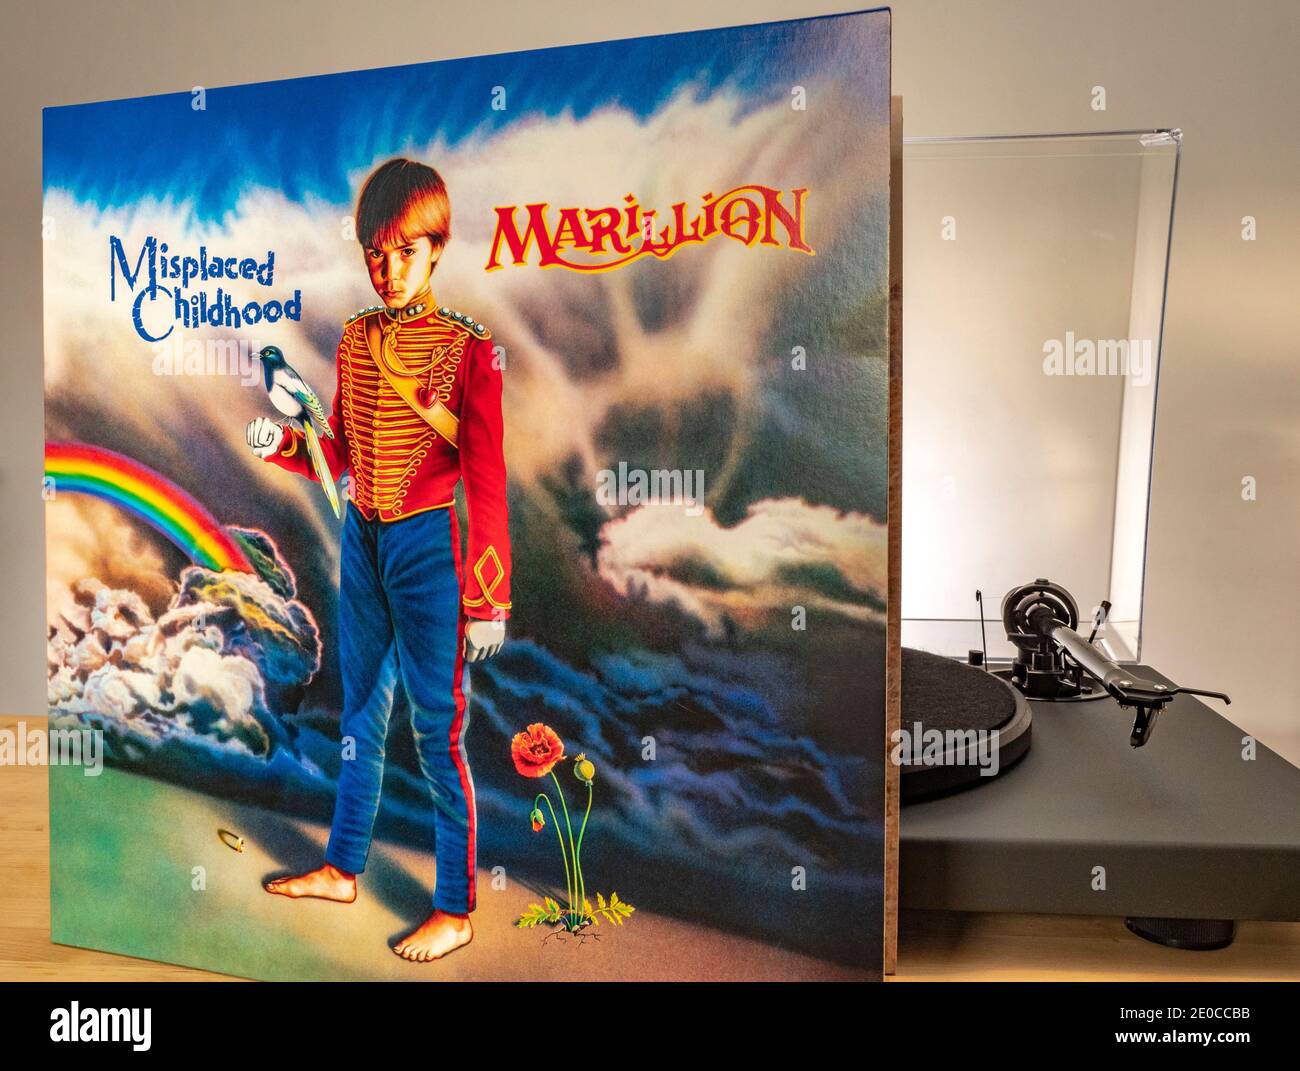 Misplaced Childhood (originally released 1985) - a Marillion vinyl record / LP in its cardboard cover, standing next to a turntable. Stock Photo